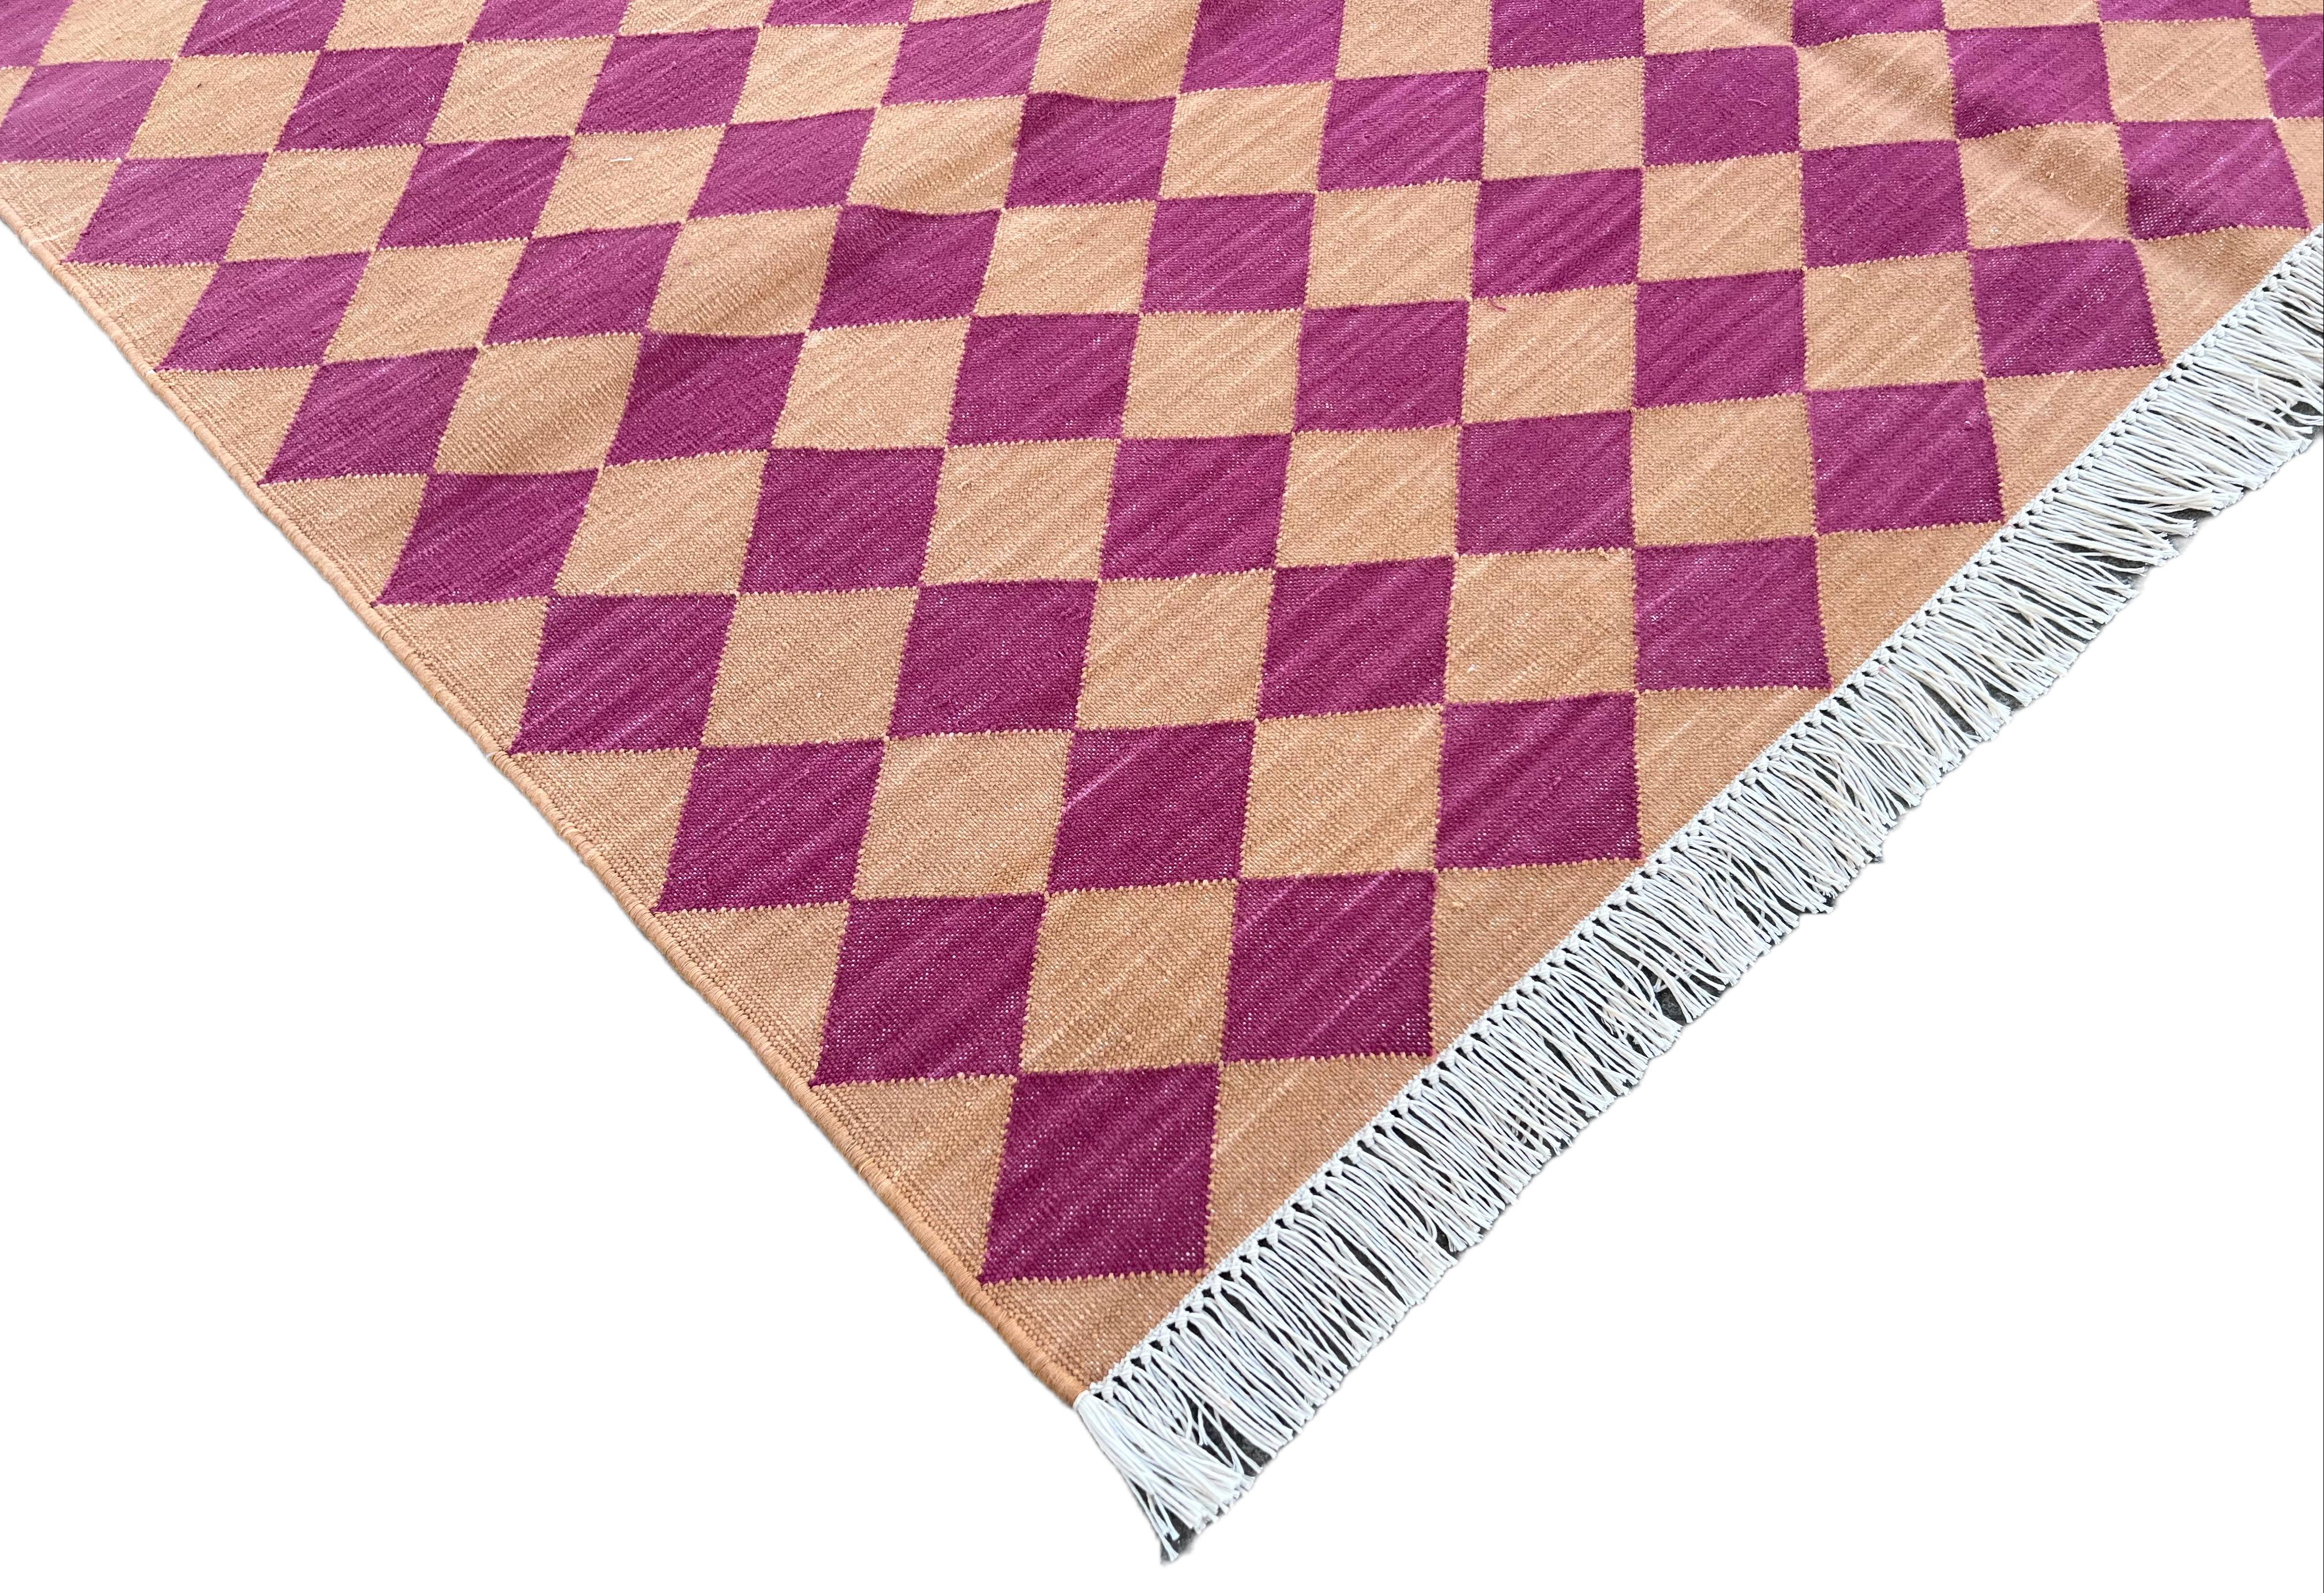 Mid-Century Modern Handmade Cotton Area Flat Weave Rug, 4x6 Pink And Tan Checked Indian Dhurrie Rug For Sale